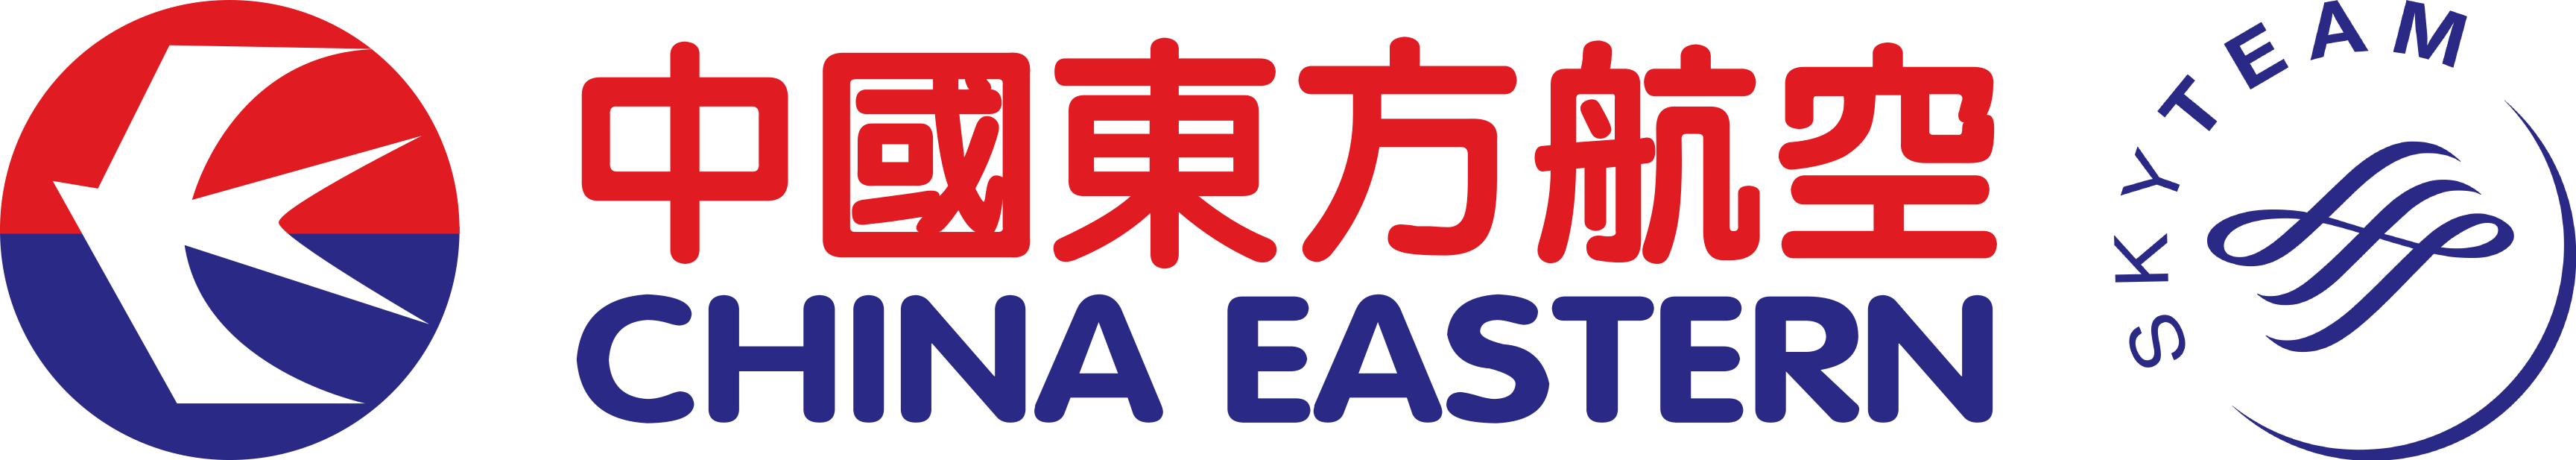 China Eastern Airlines New Logo - China Eastern Airlines | Logopedia | FANDOM powered by Wikia